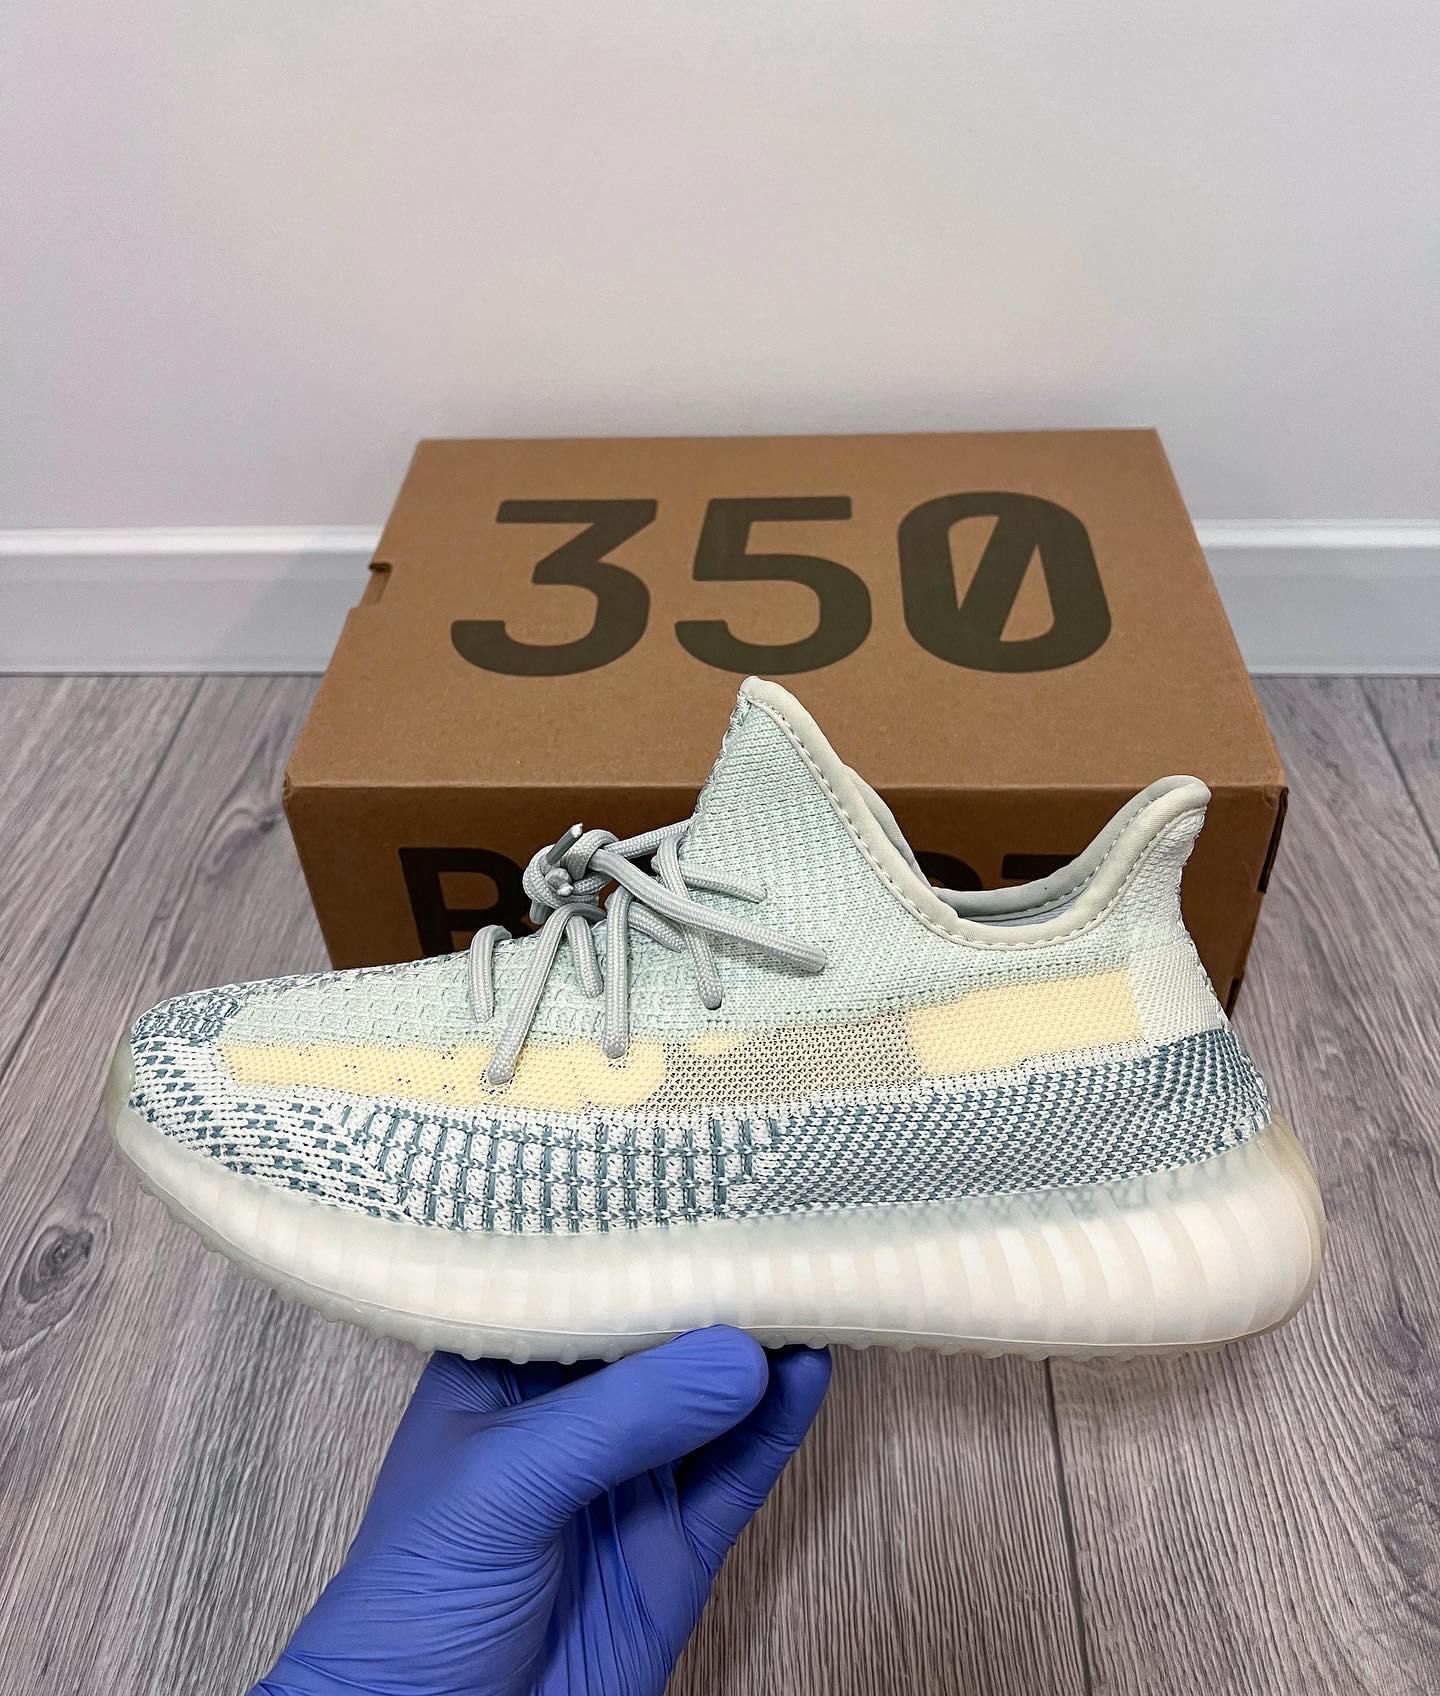 Adidas Yeezy Boost 350 V2 Cloud White